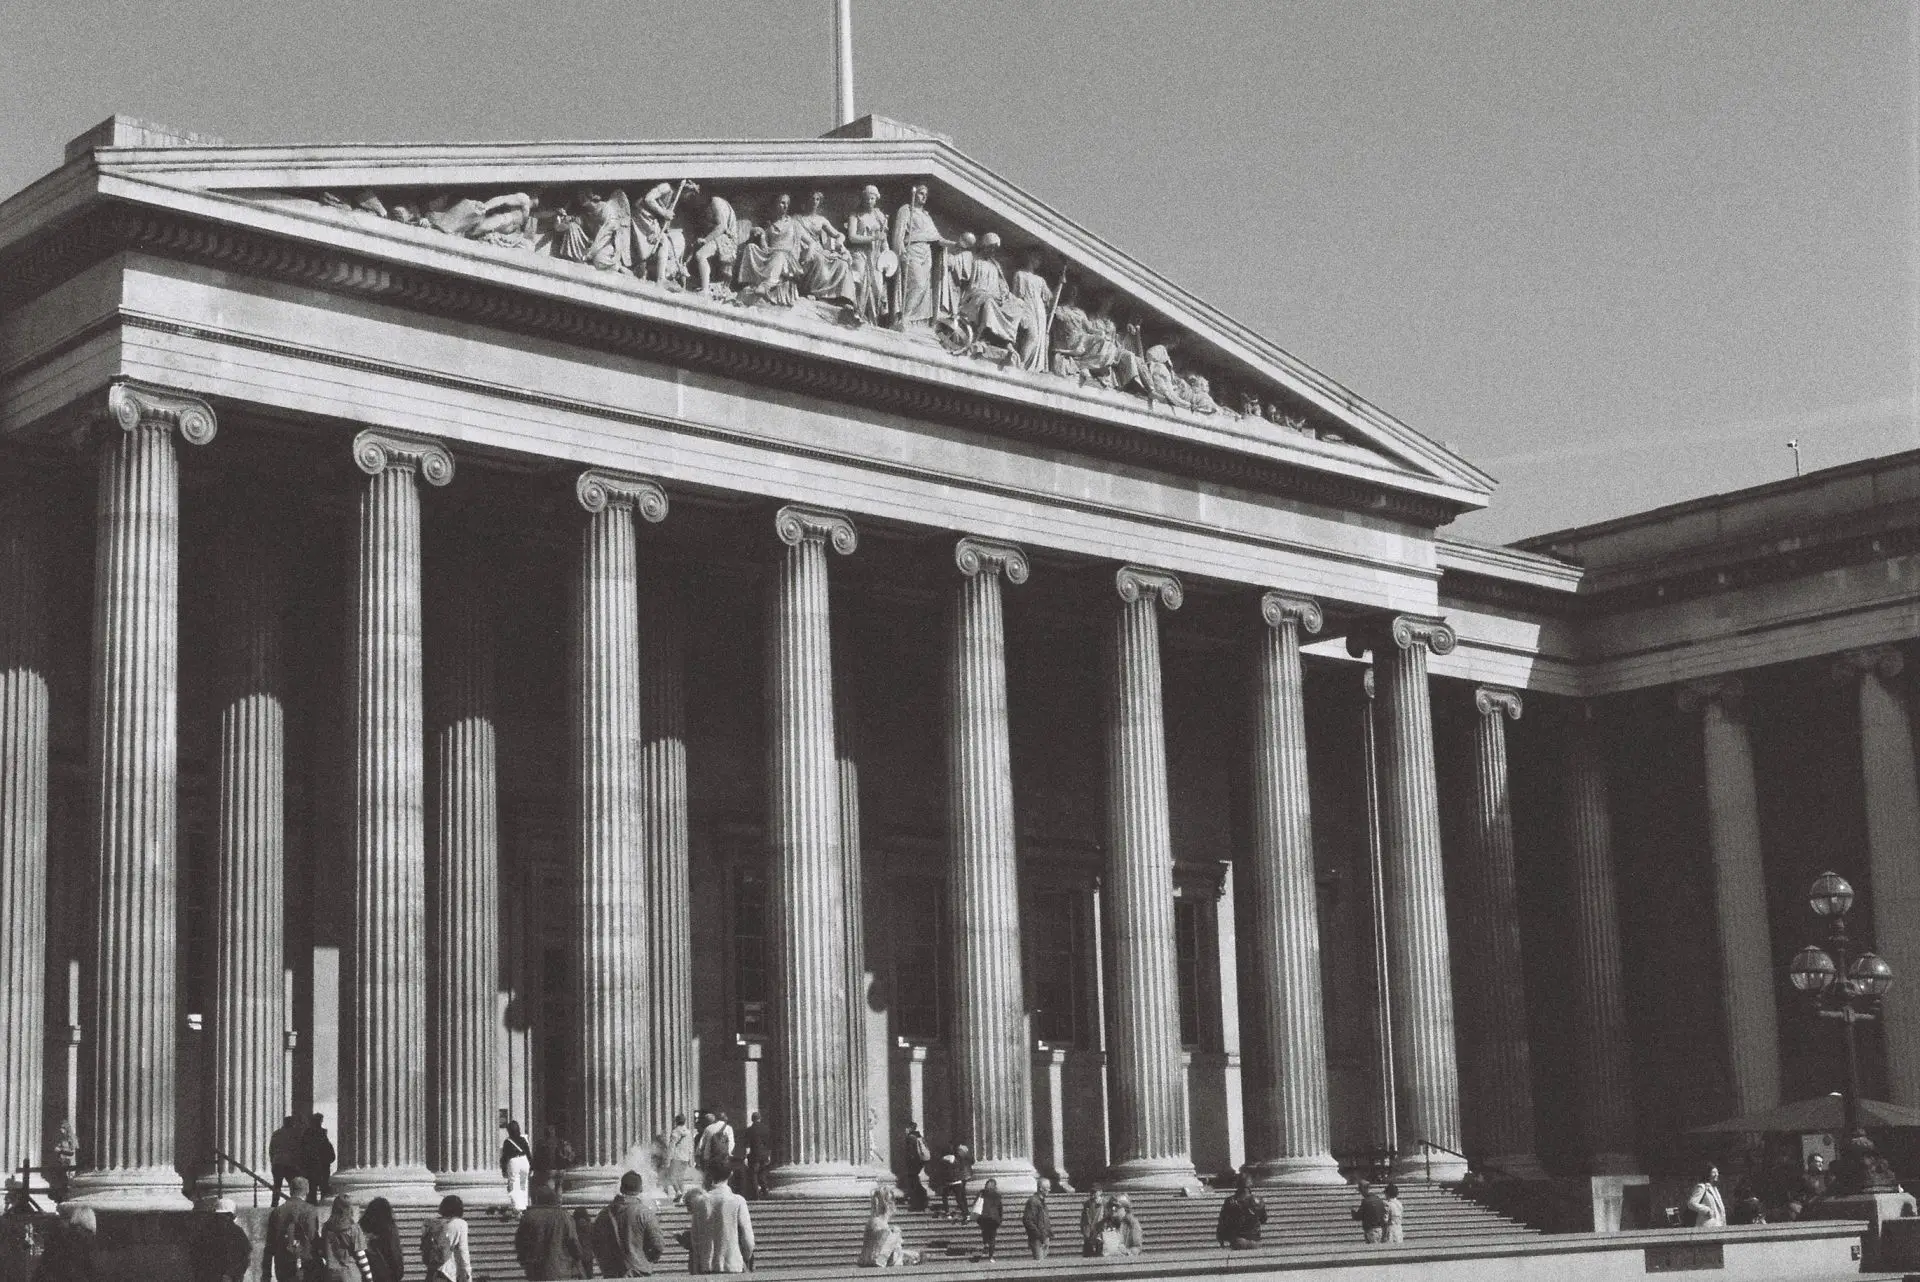 Neoclassical building with columns